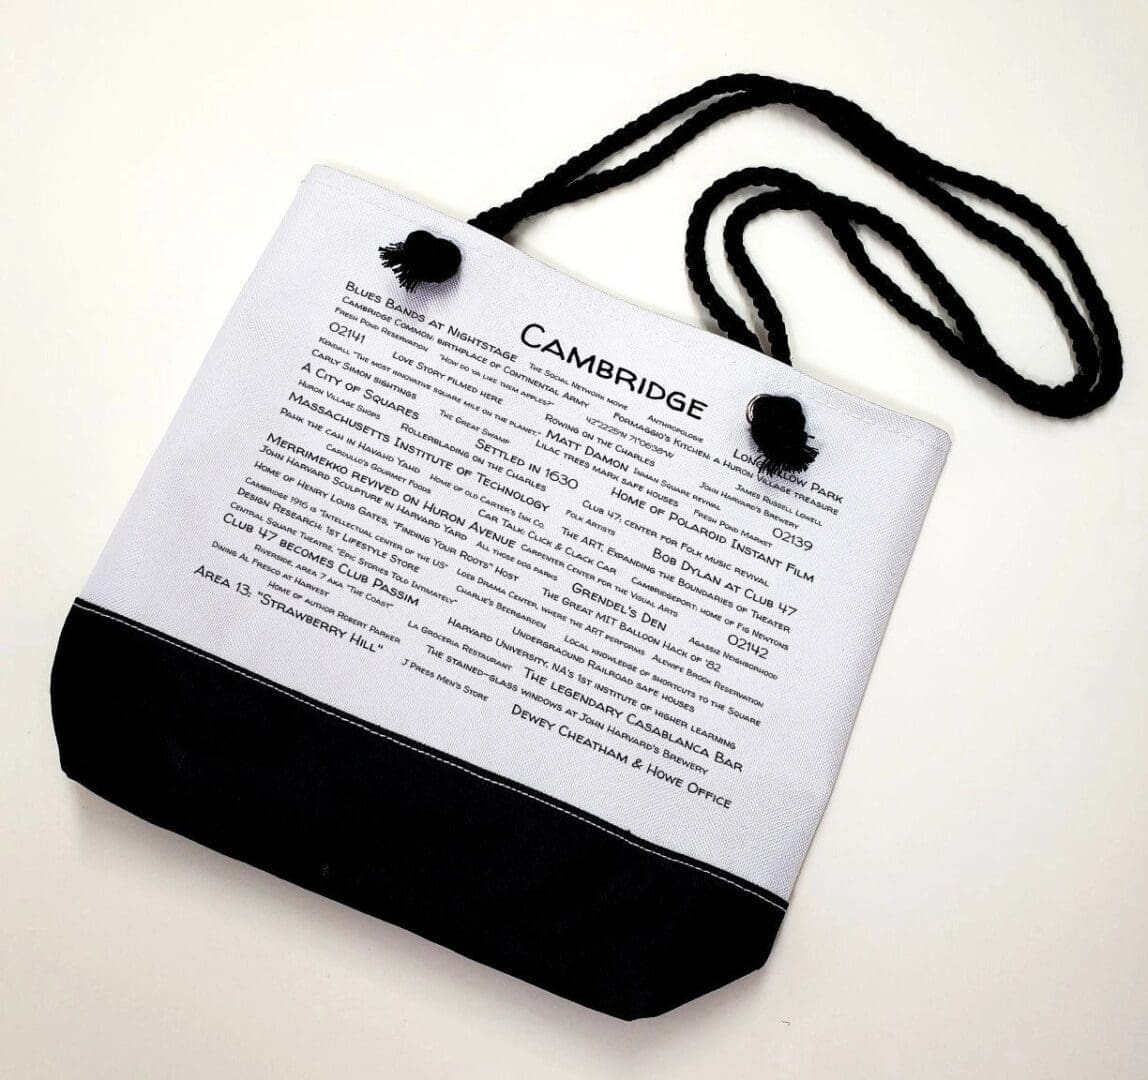 A white bag with black strap and words on it.